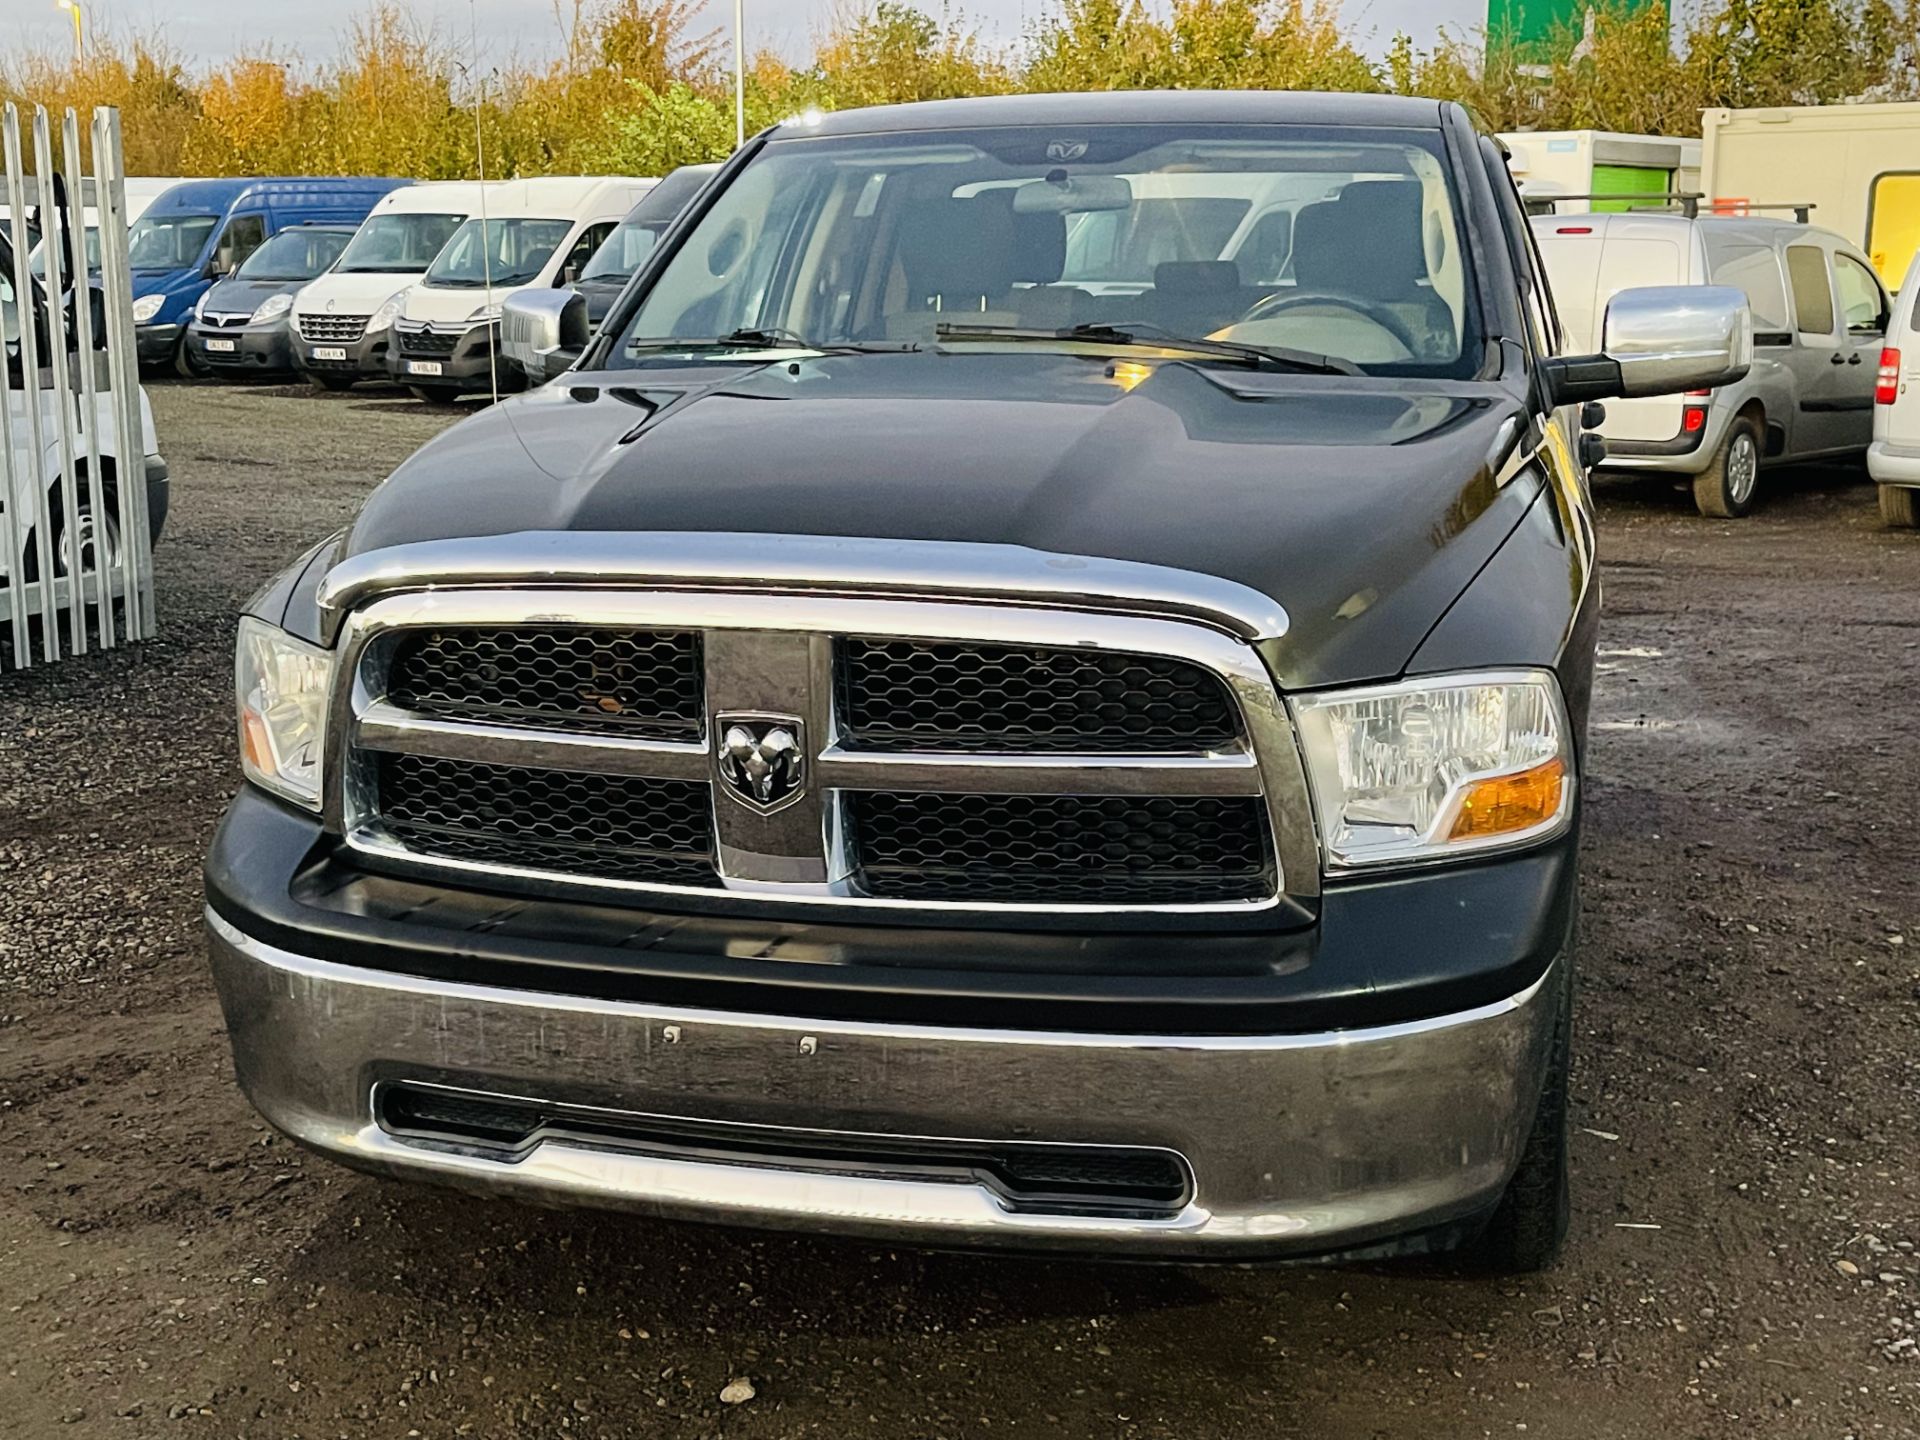 Dodge Ram 4.7 V8 1500 ST 4WD ' 2012 Year ' A/C - Cruise Control - 6 Seats - Chrome Pack - Image 3 of 27